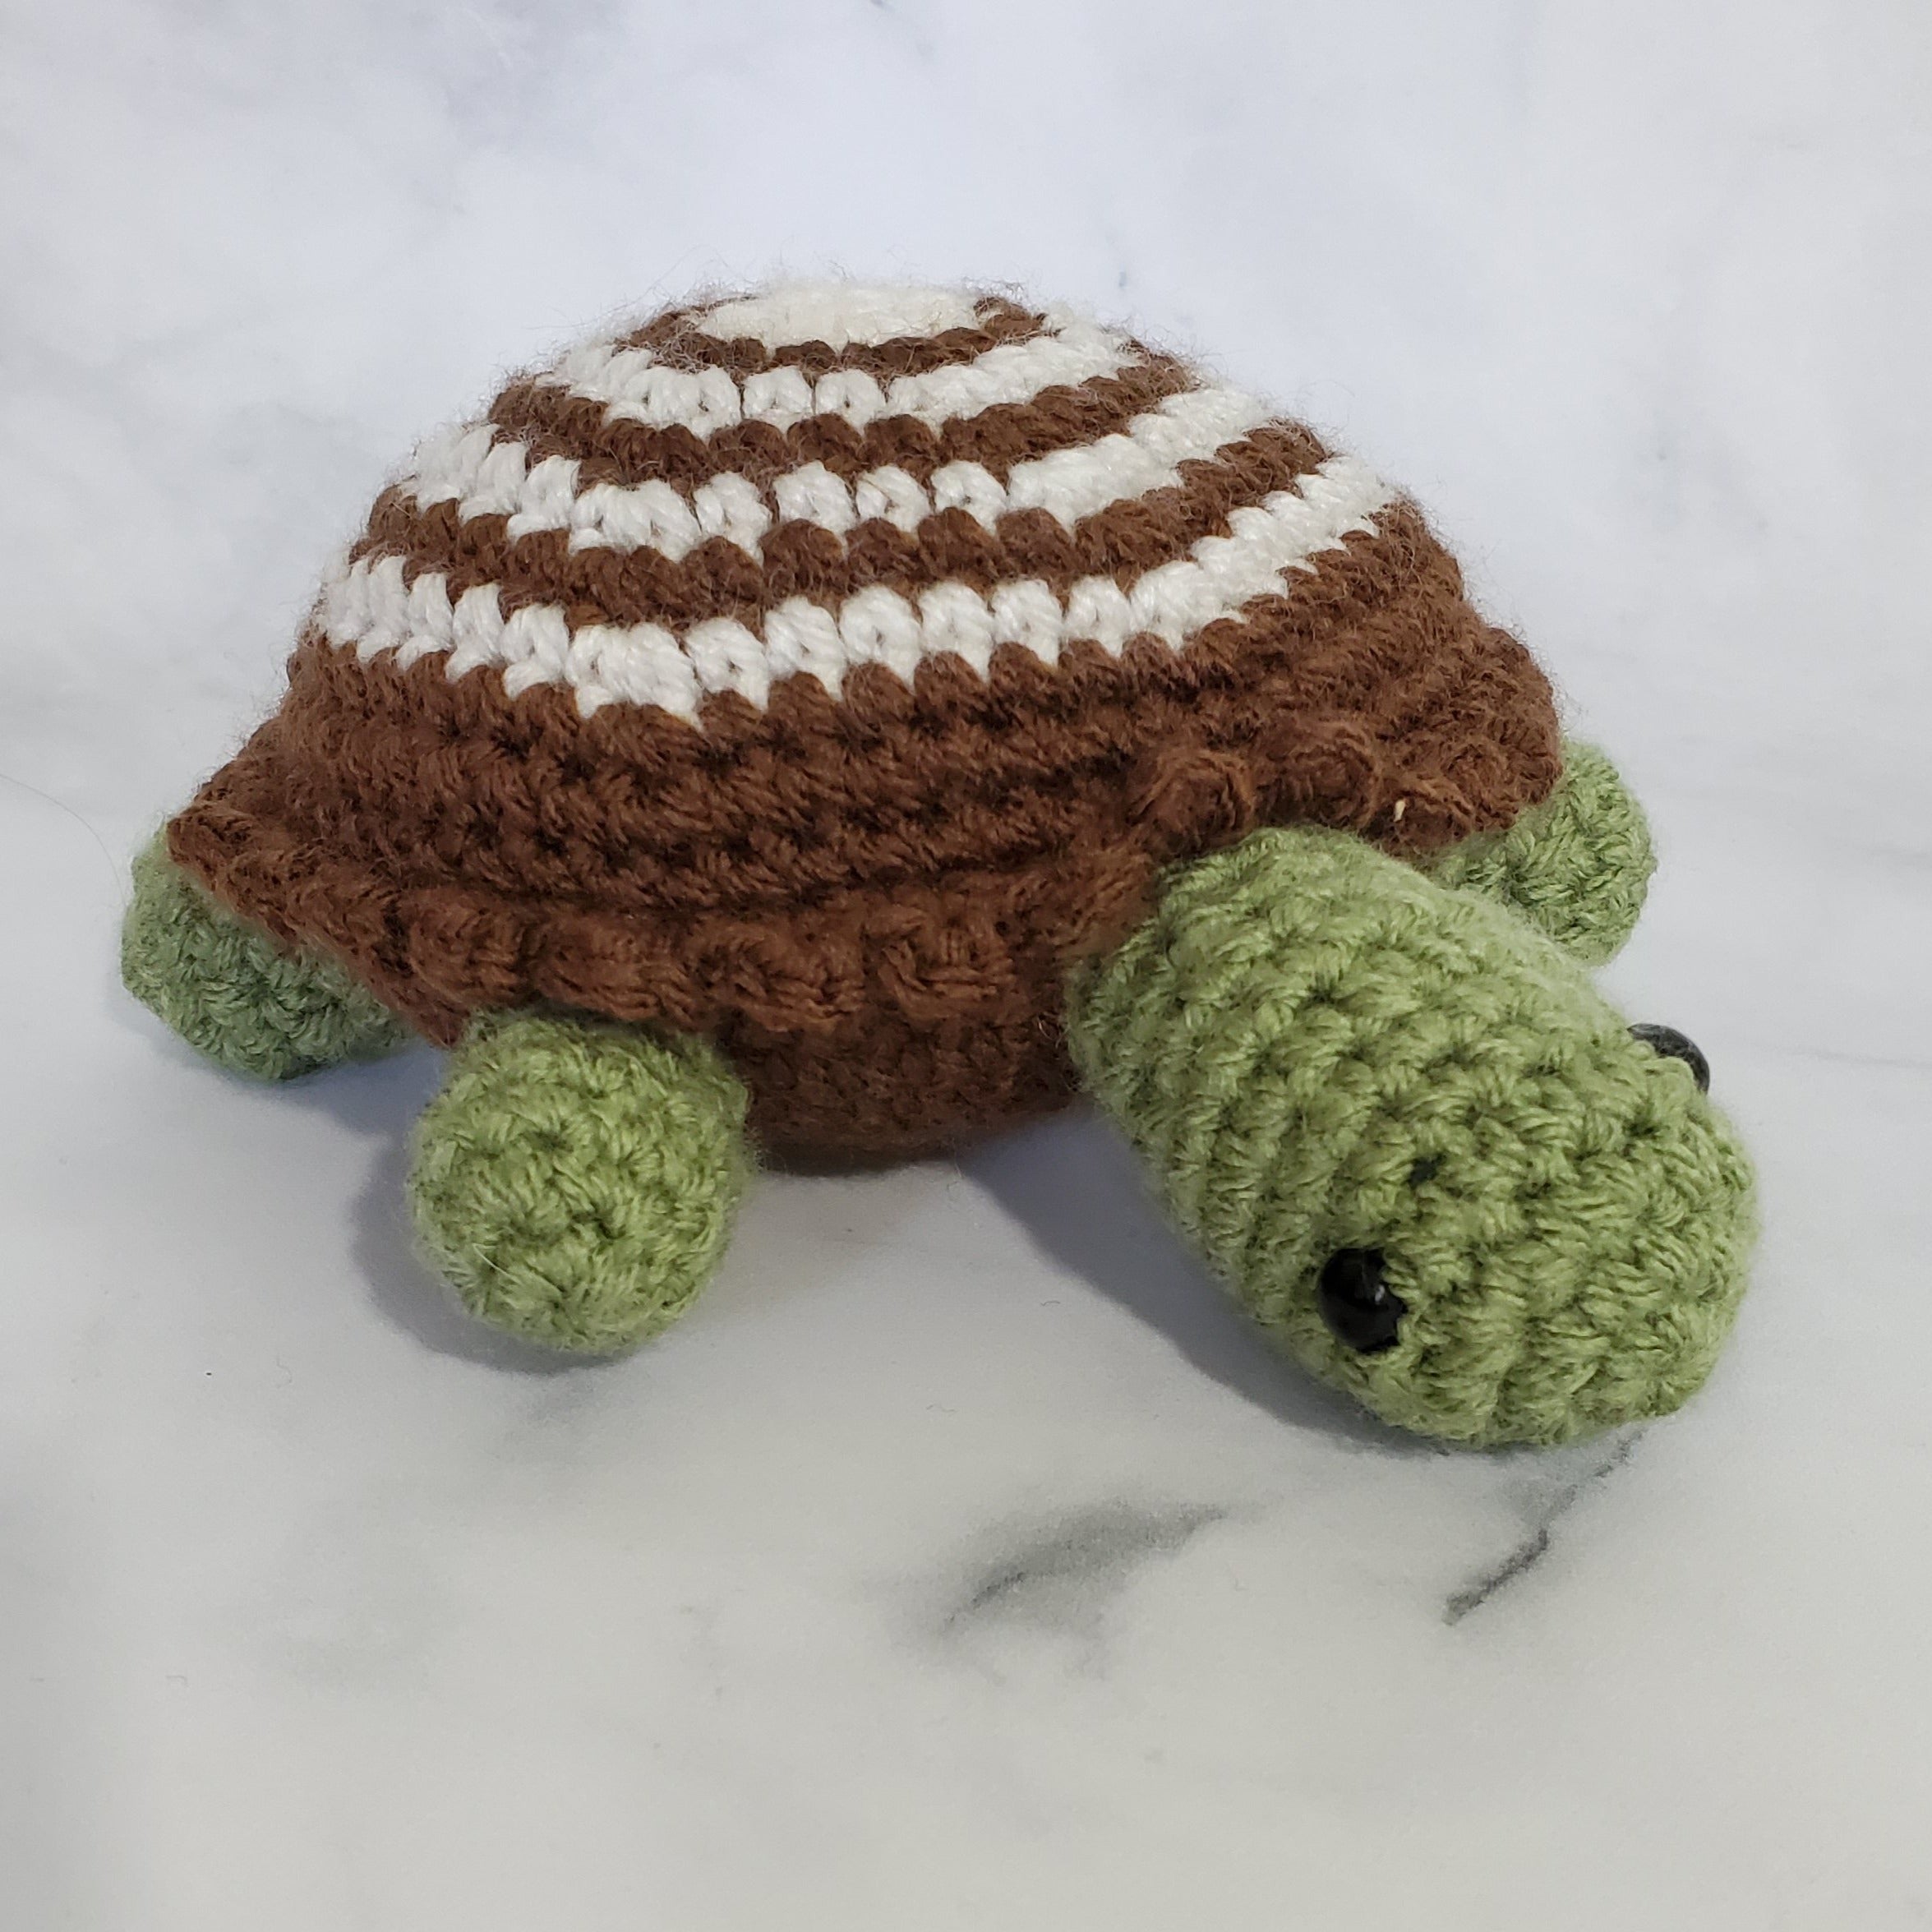 Turtle Plush Toy - 4 Inches